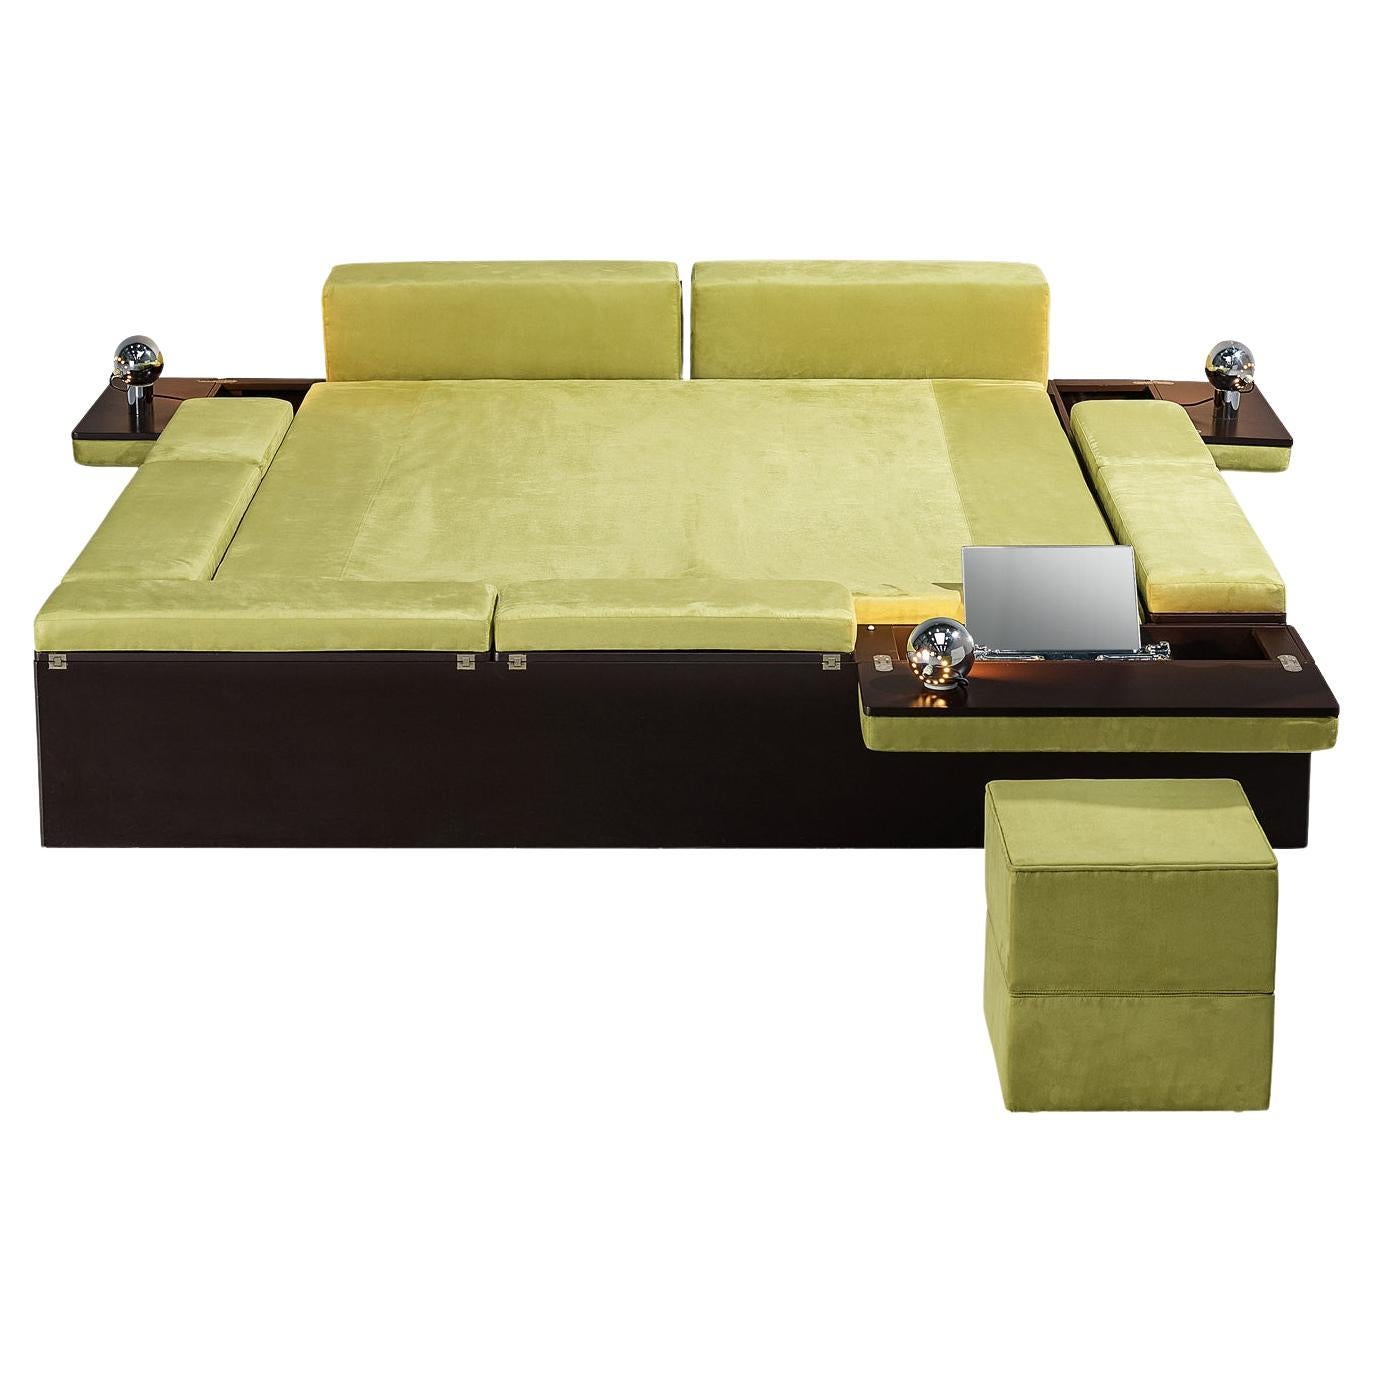 Luciano Bertoncini for Cjfra 'Zattera' Bed in Alcantara and Lacquered Wood 